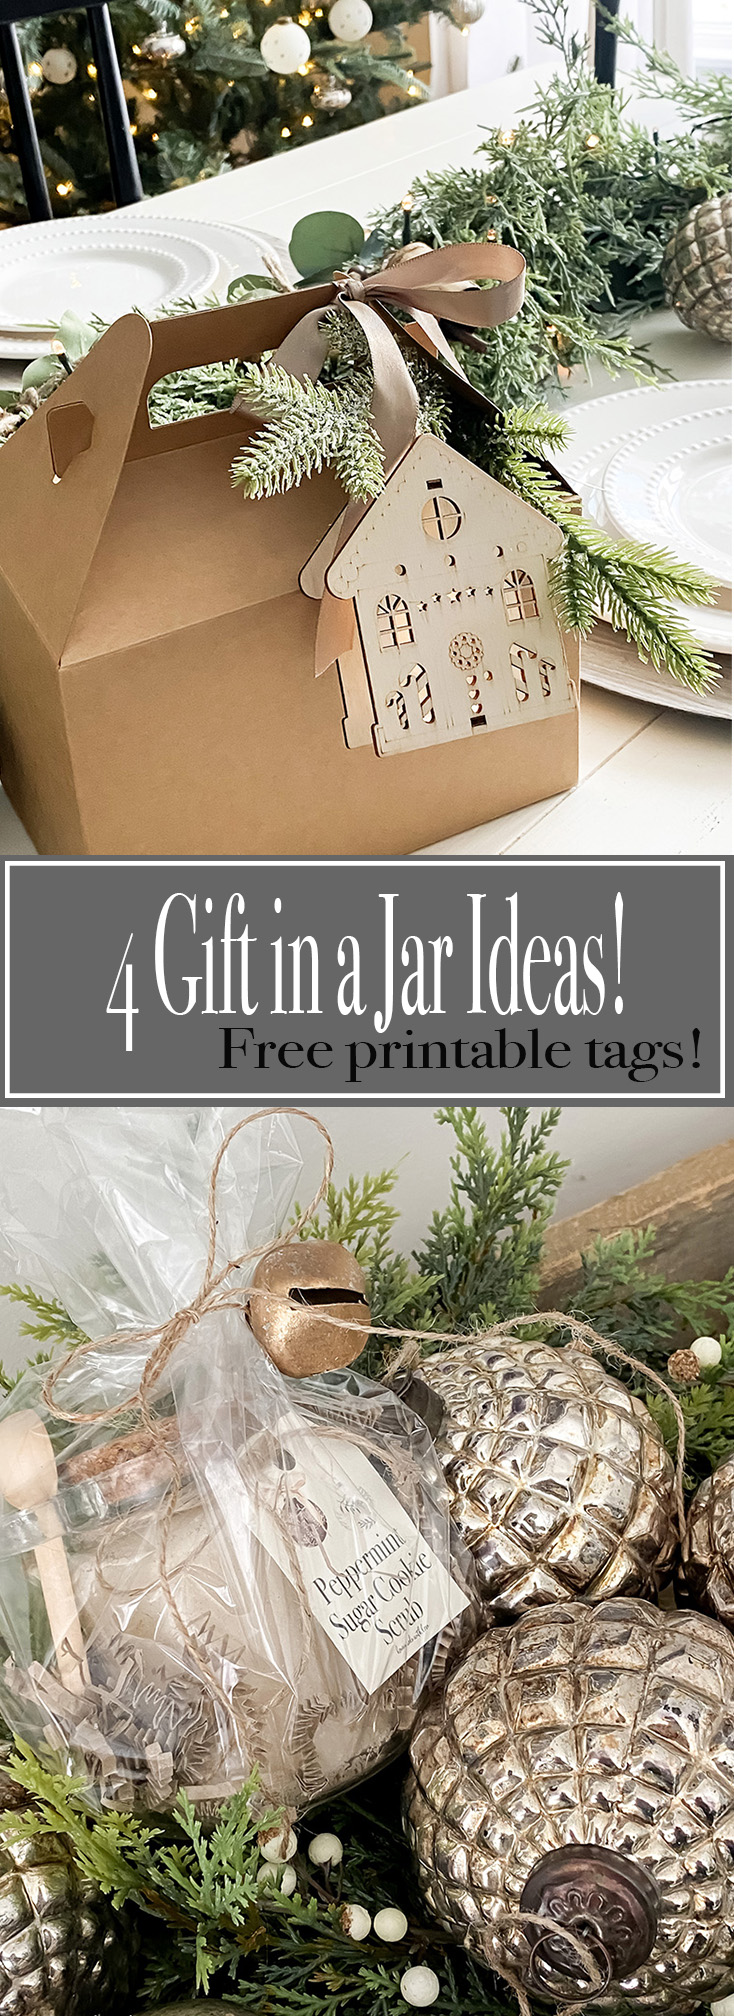 4 GIFT IN A JAR IDEAS - FREE PRINTABLE TAGS